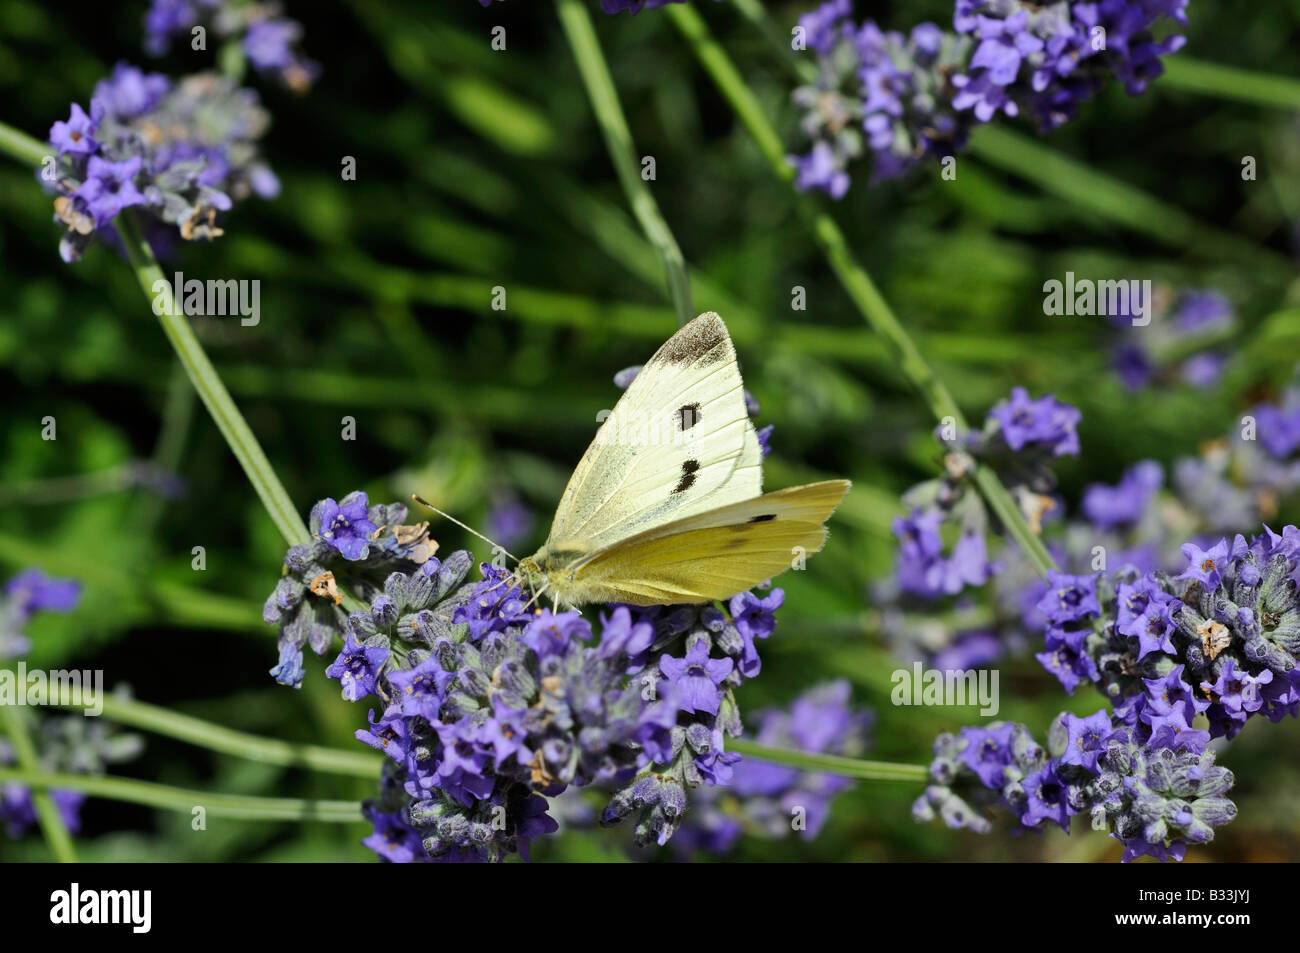 Small cabbage white butterfly Pieris rapae feeding on lavender flower Stock Photo